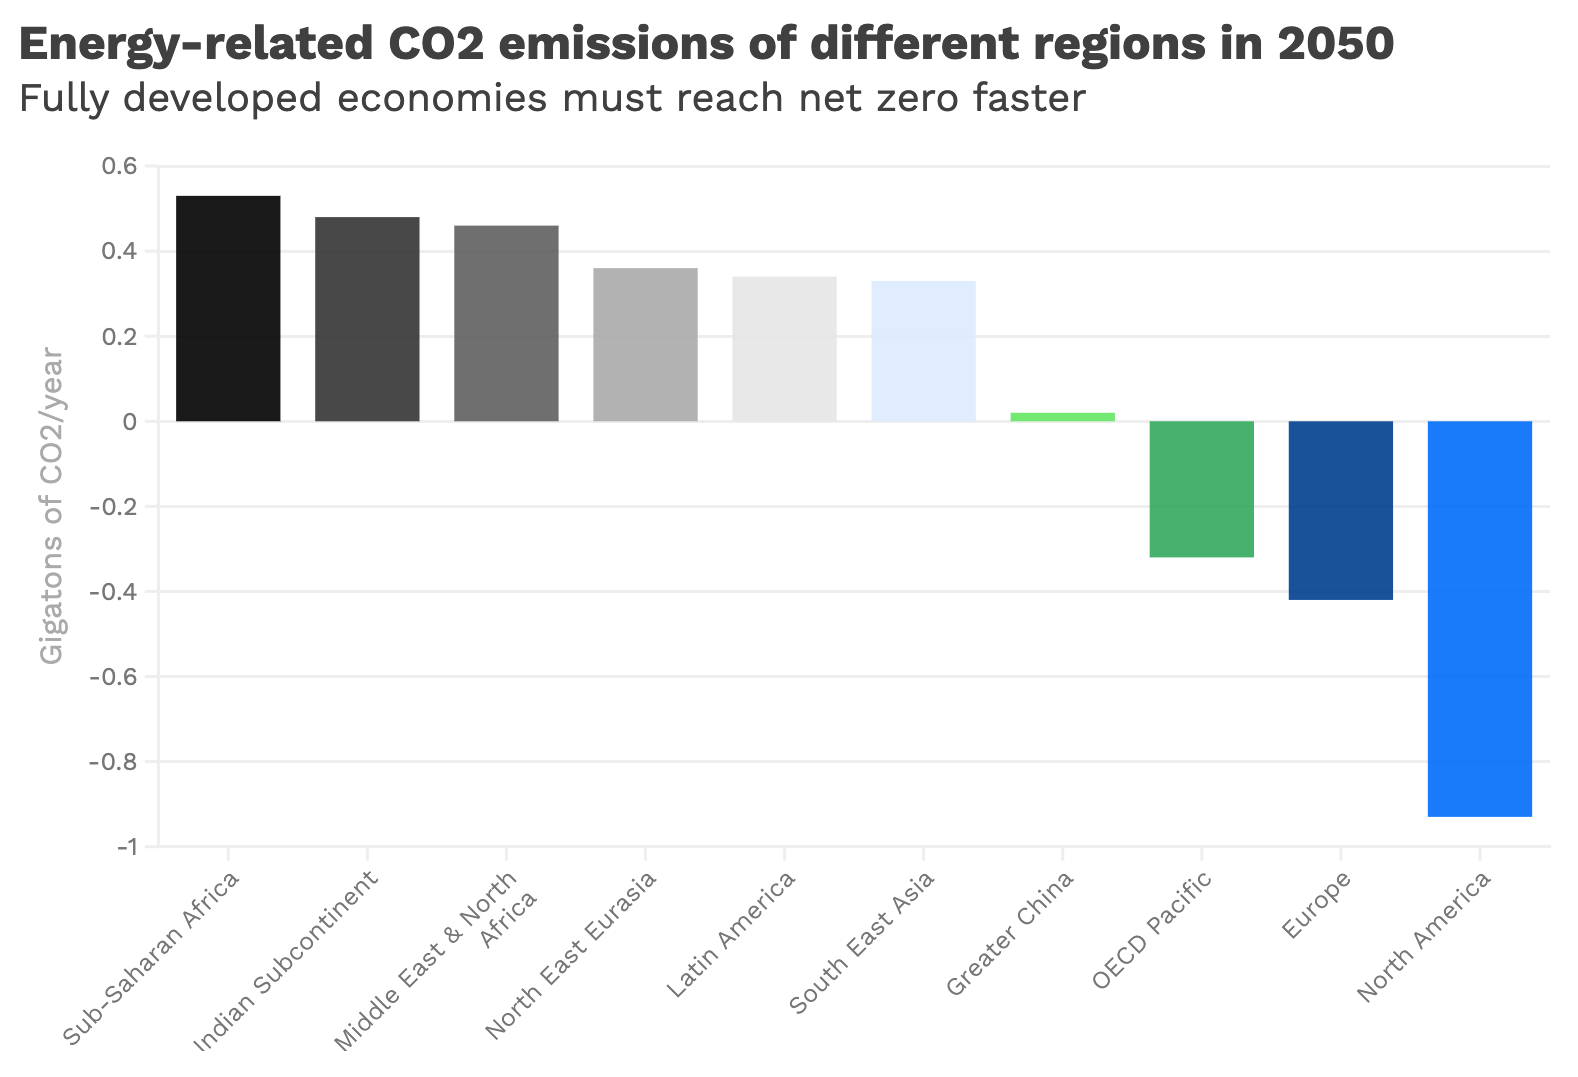 Chart of energy-related CO2 emissions of different regions in 2050